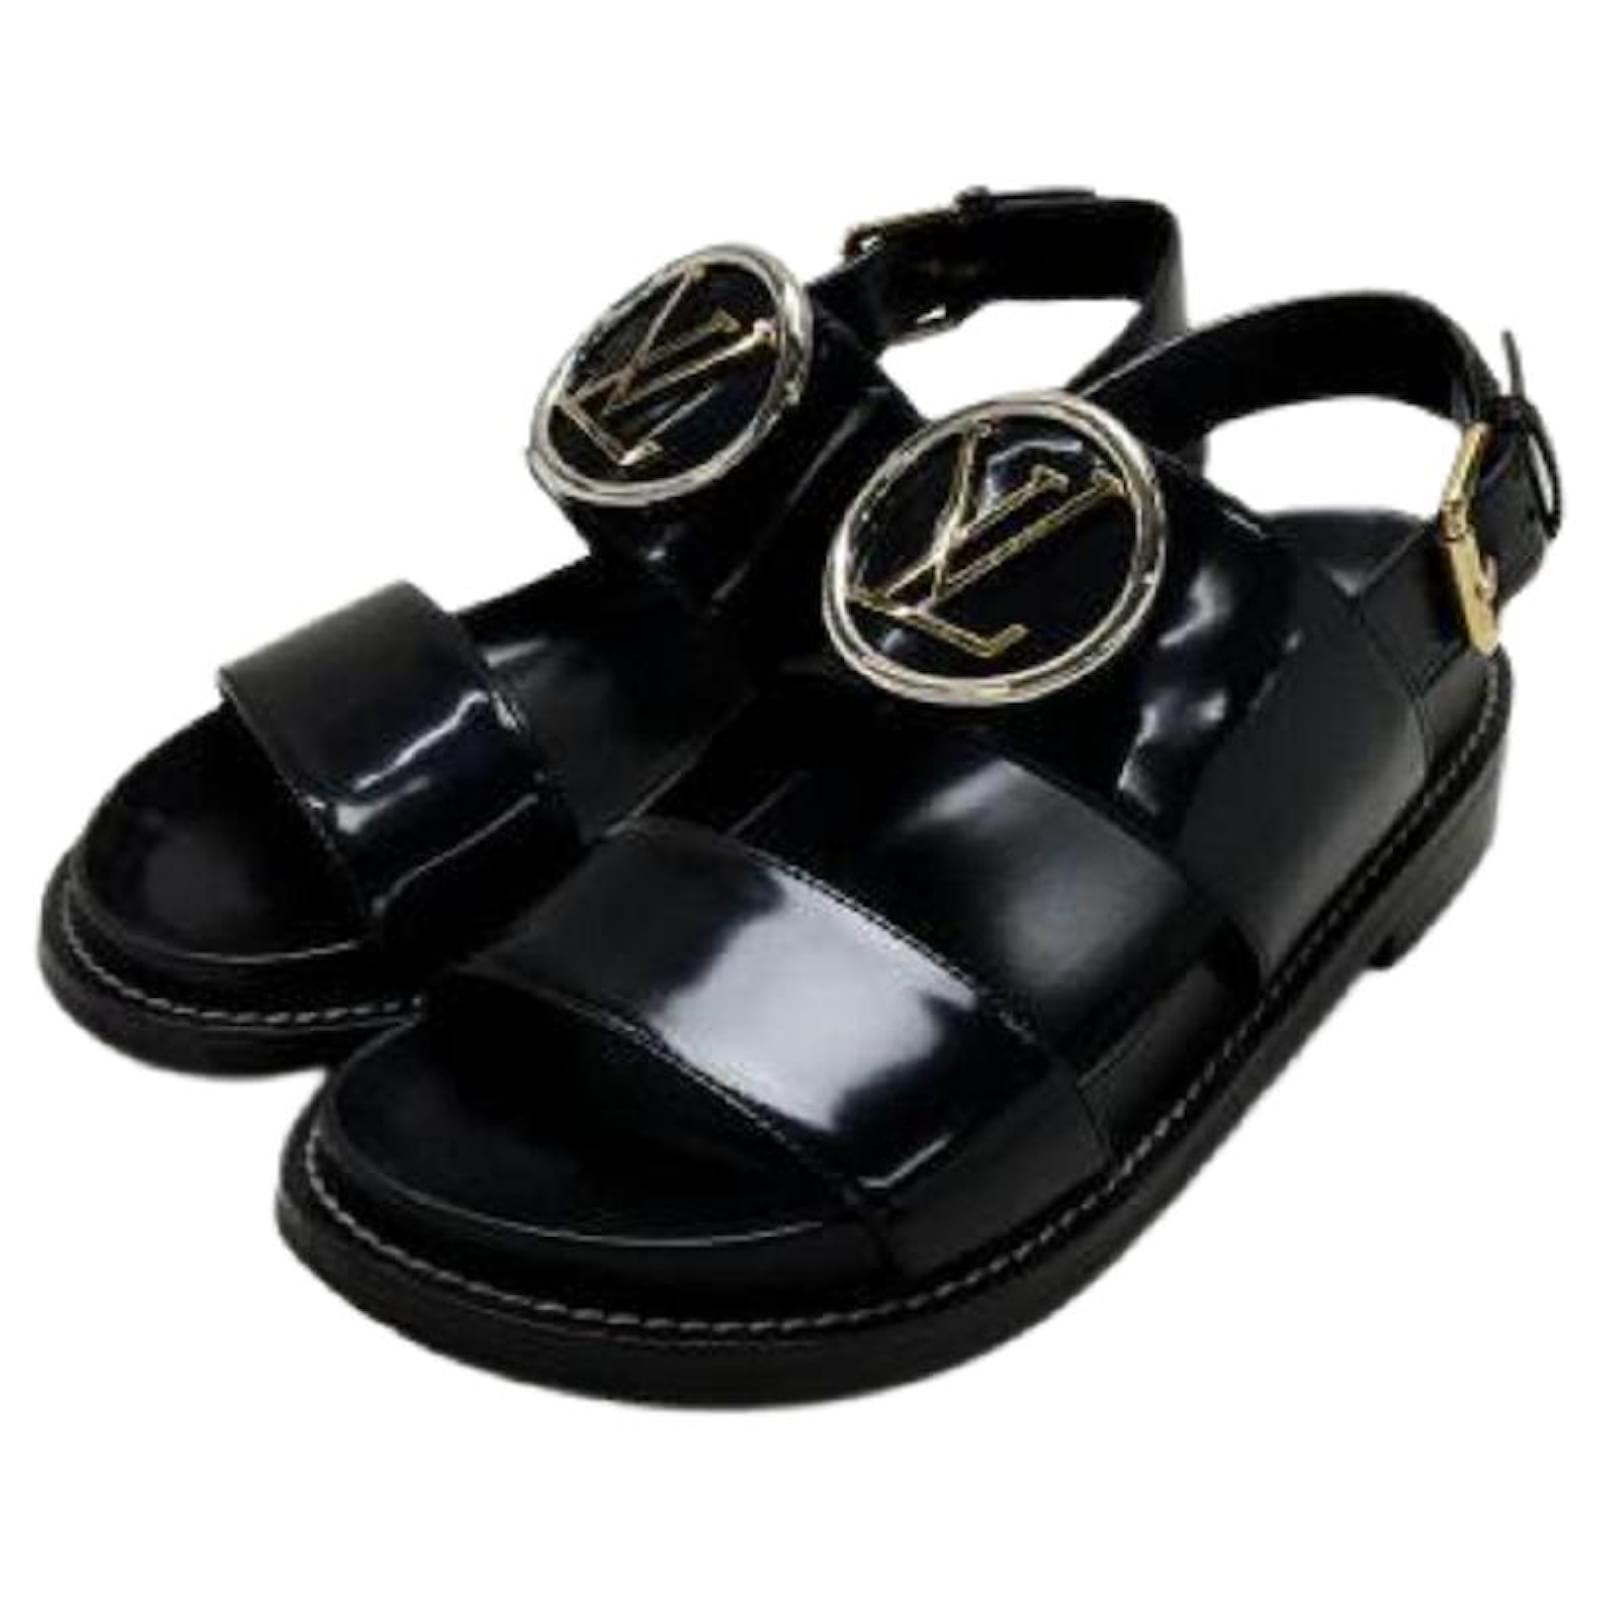 Louis Vuitton Pre-owned Women's Leather Sandals